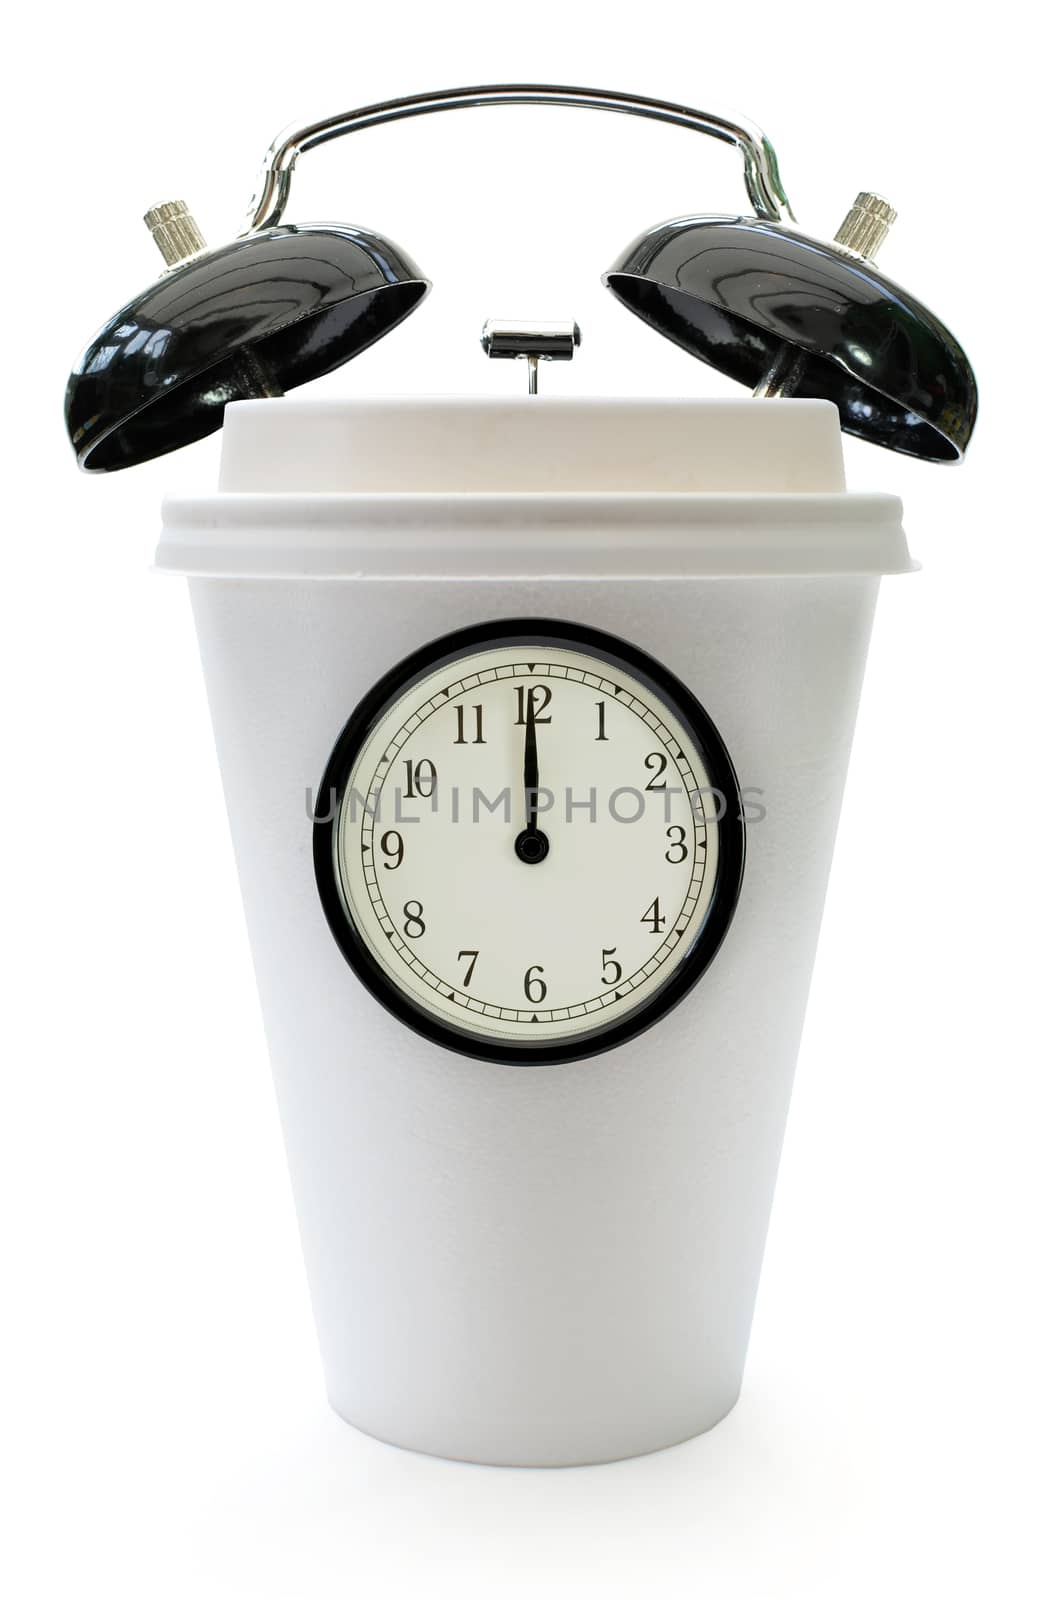 Taking a break concept with clock face and alarm bells around a plastic coffee cup over a white background